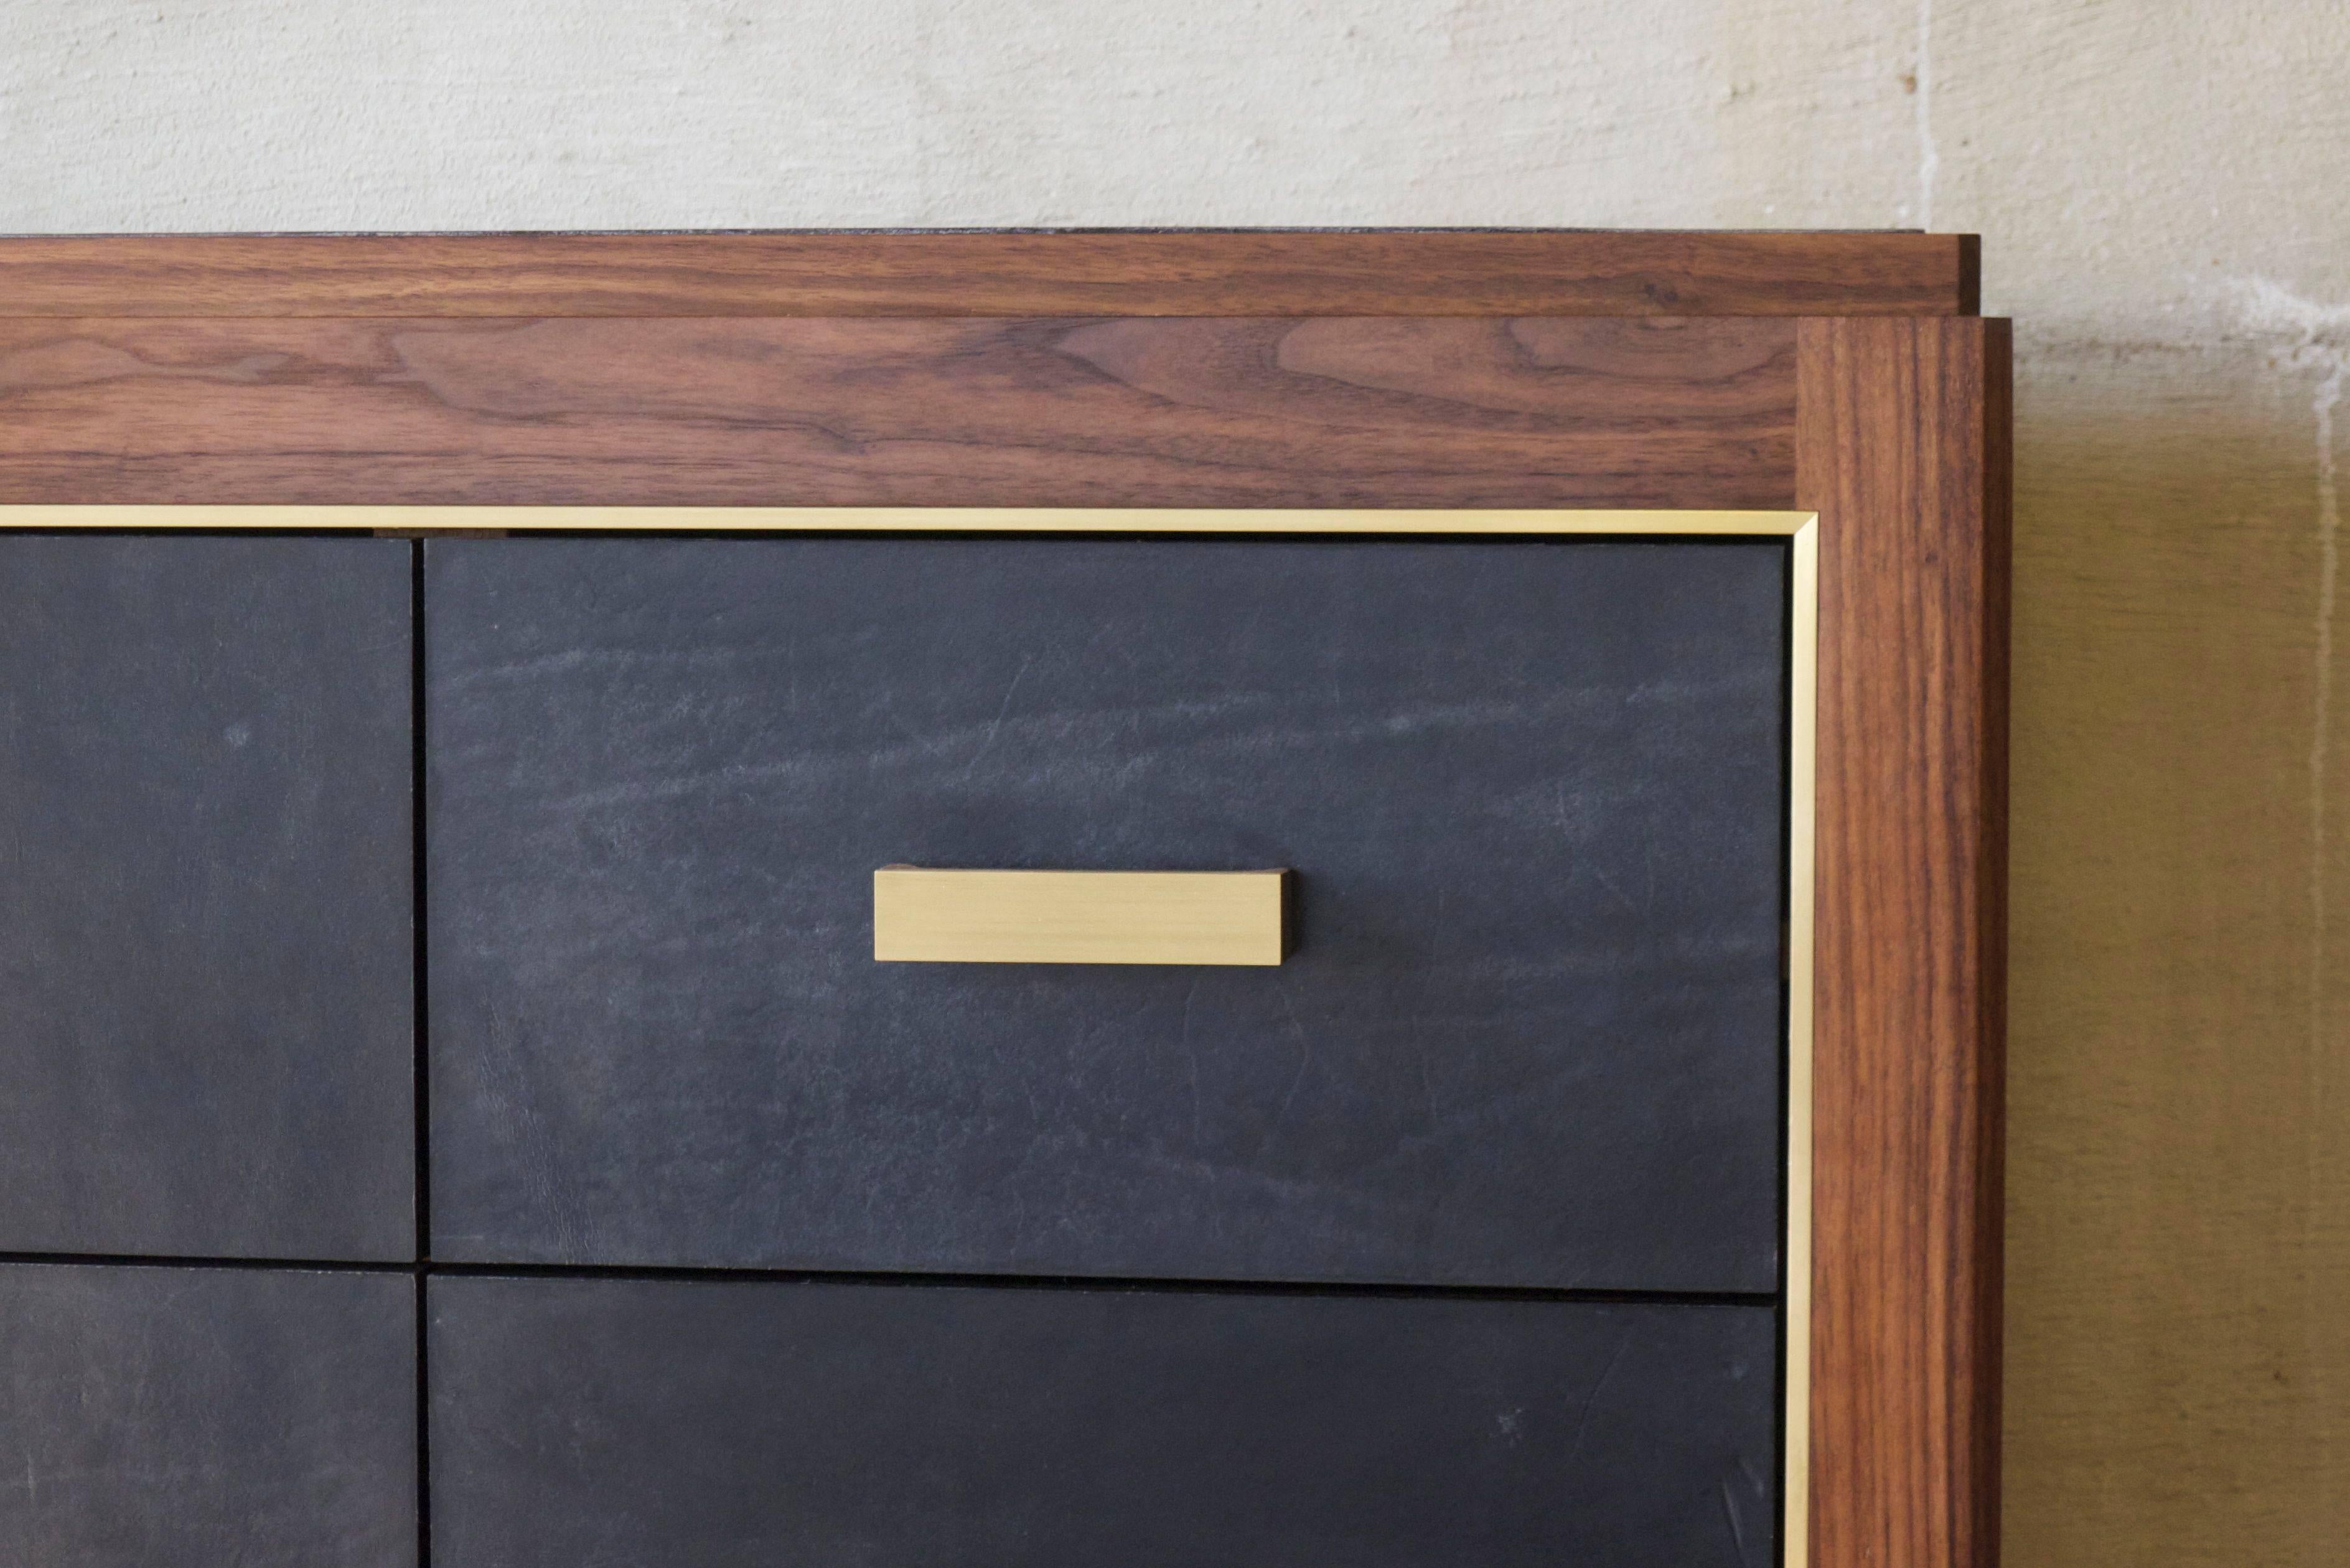 Inspired by Mid-Century Modern Mexican design, this 12-drawer bureau is made with solid walnut construction with hand-dyed saddle leather drawer faces and blotter. Saddle leather choices include natural, dark brown, black, jade or Aubergine